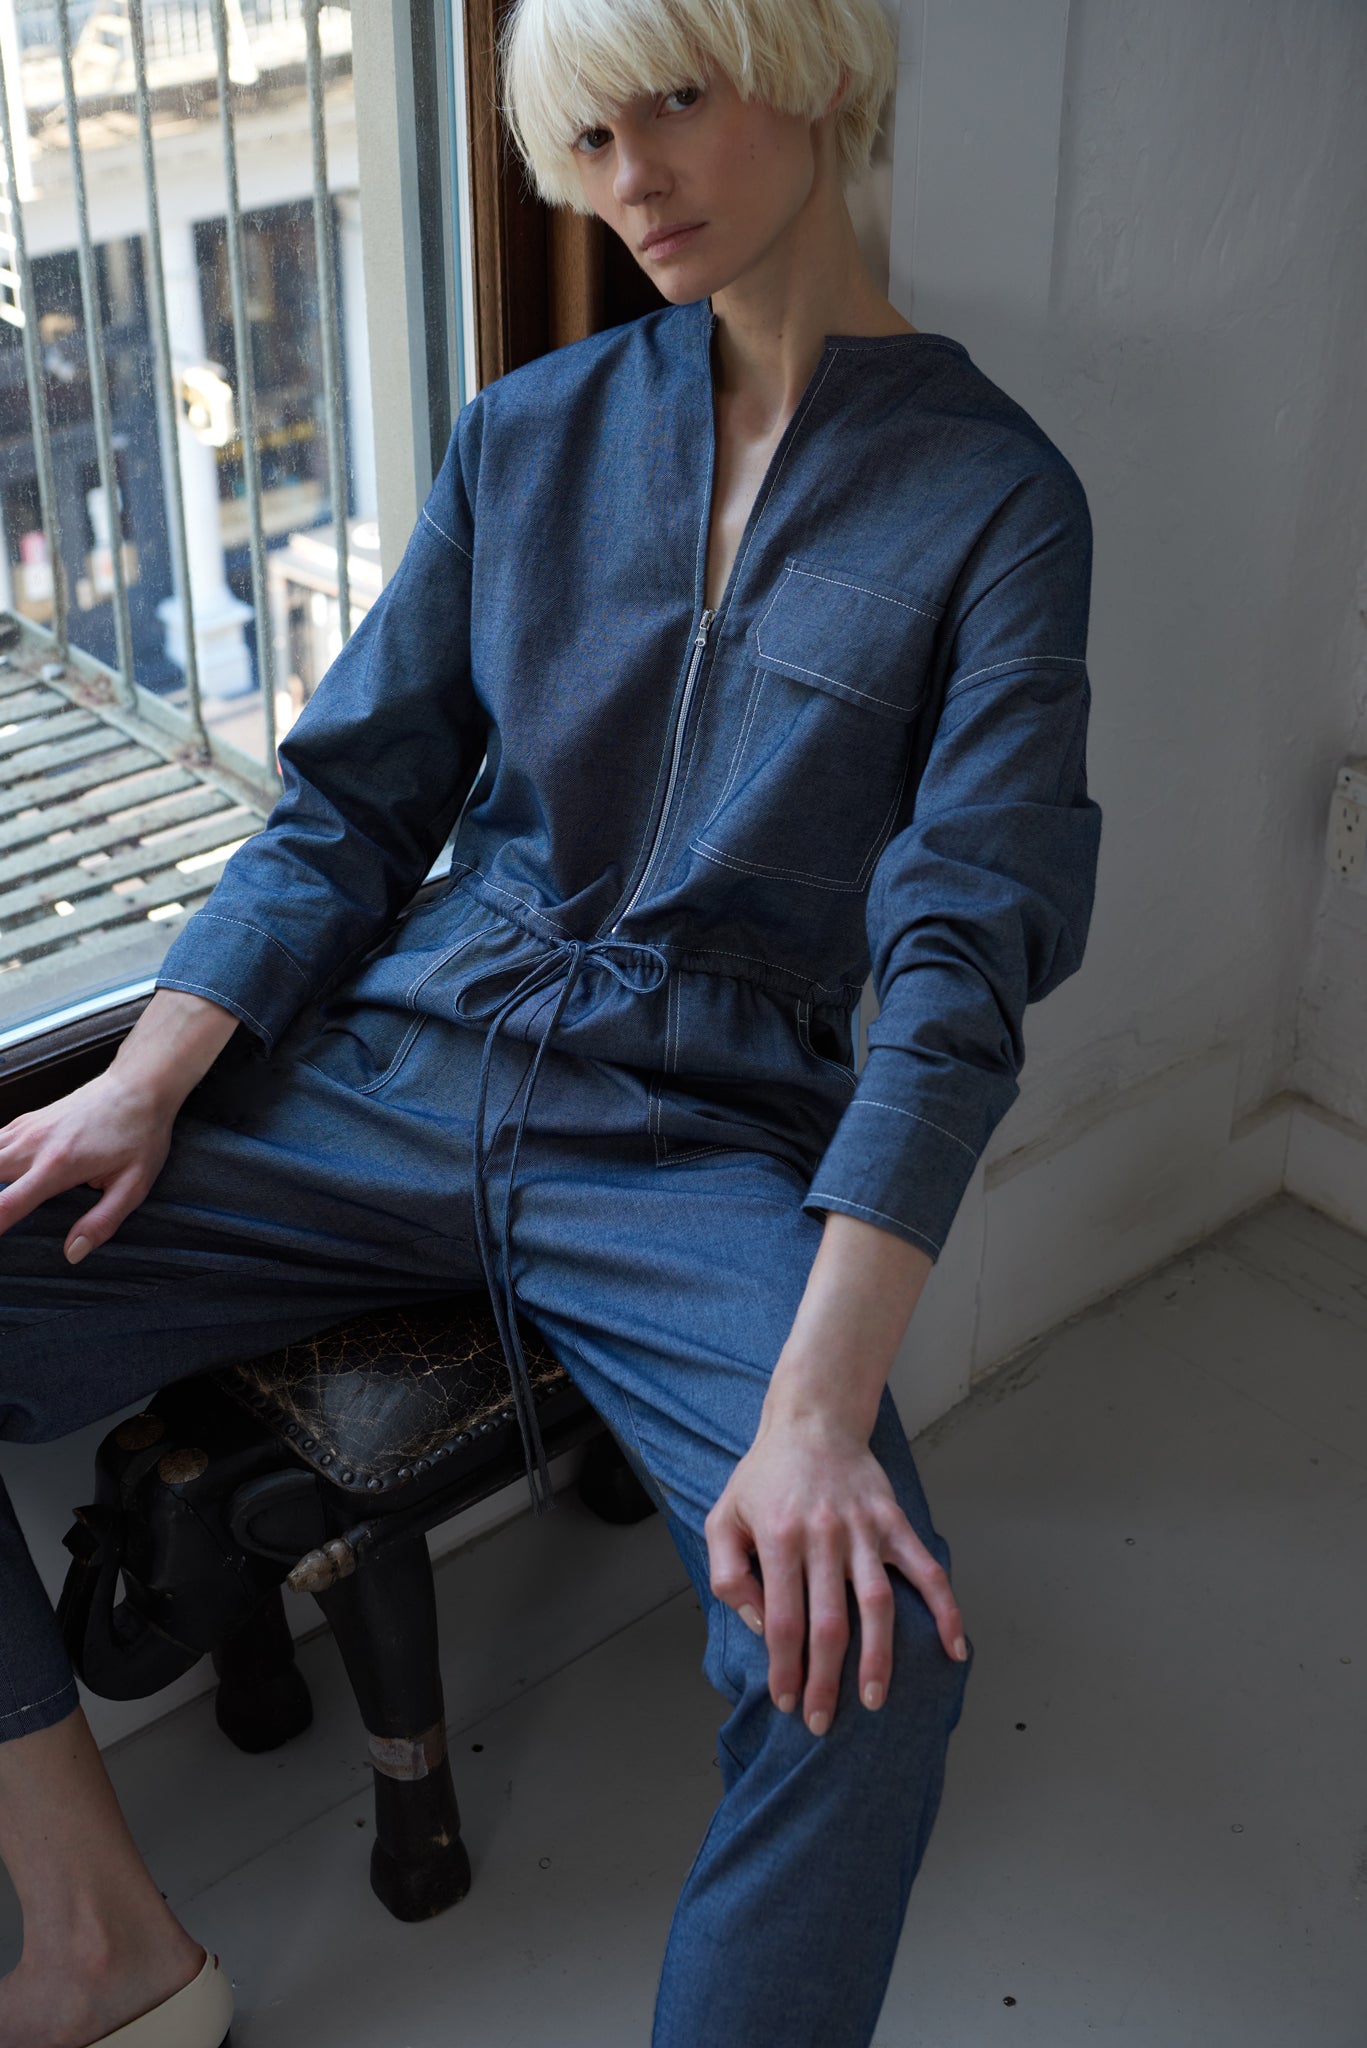 woman sitting wearing japanese denim jumpsuit with sleeves made from GOTS organic cotton in indigo blue